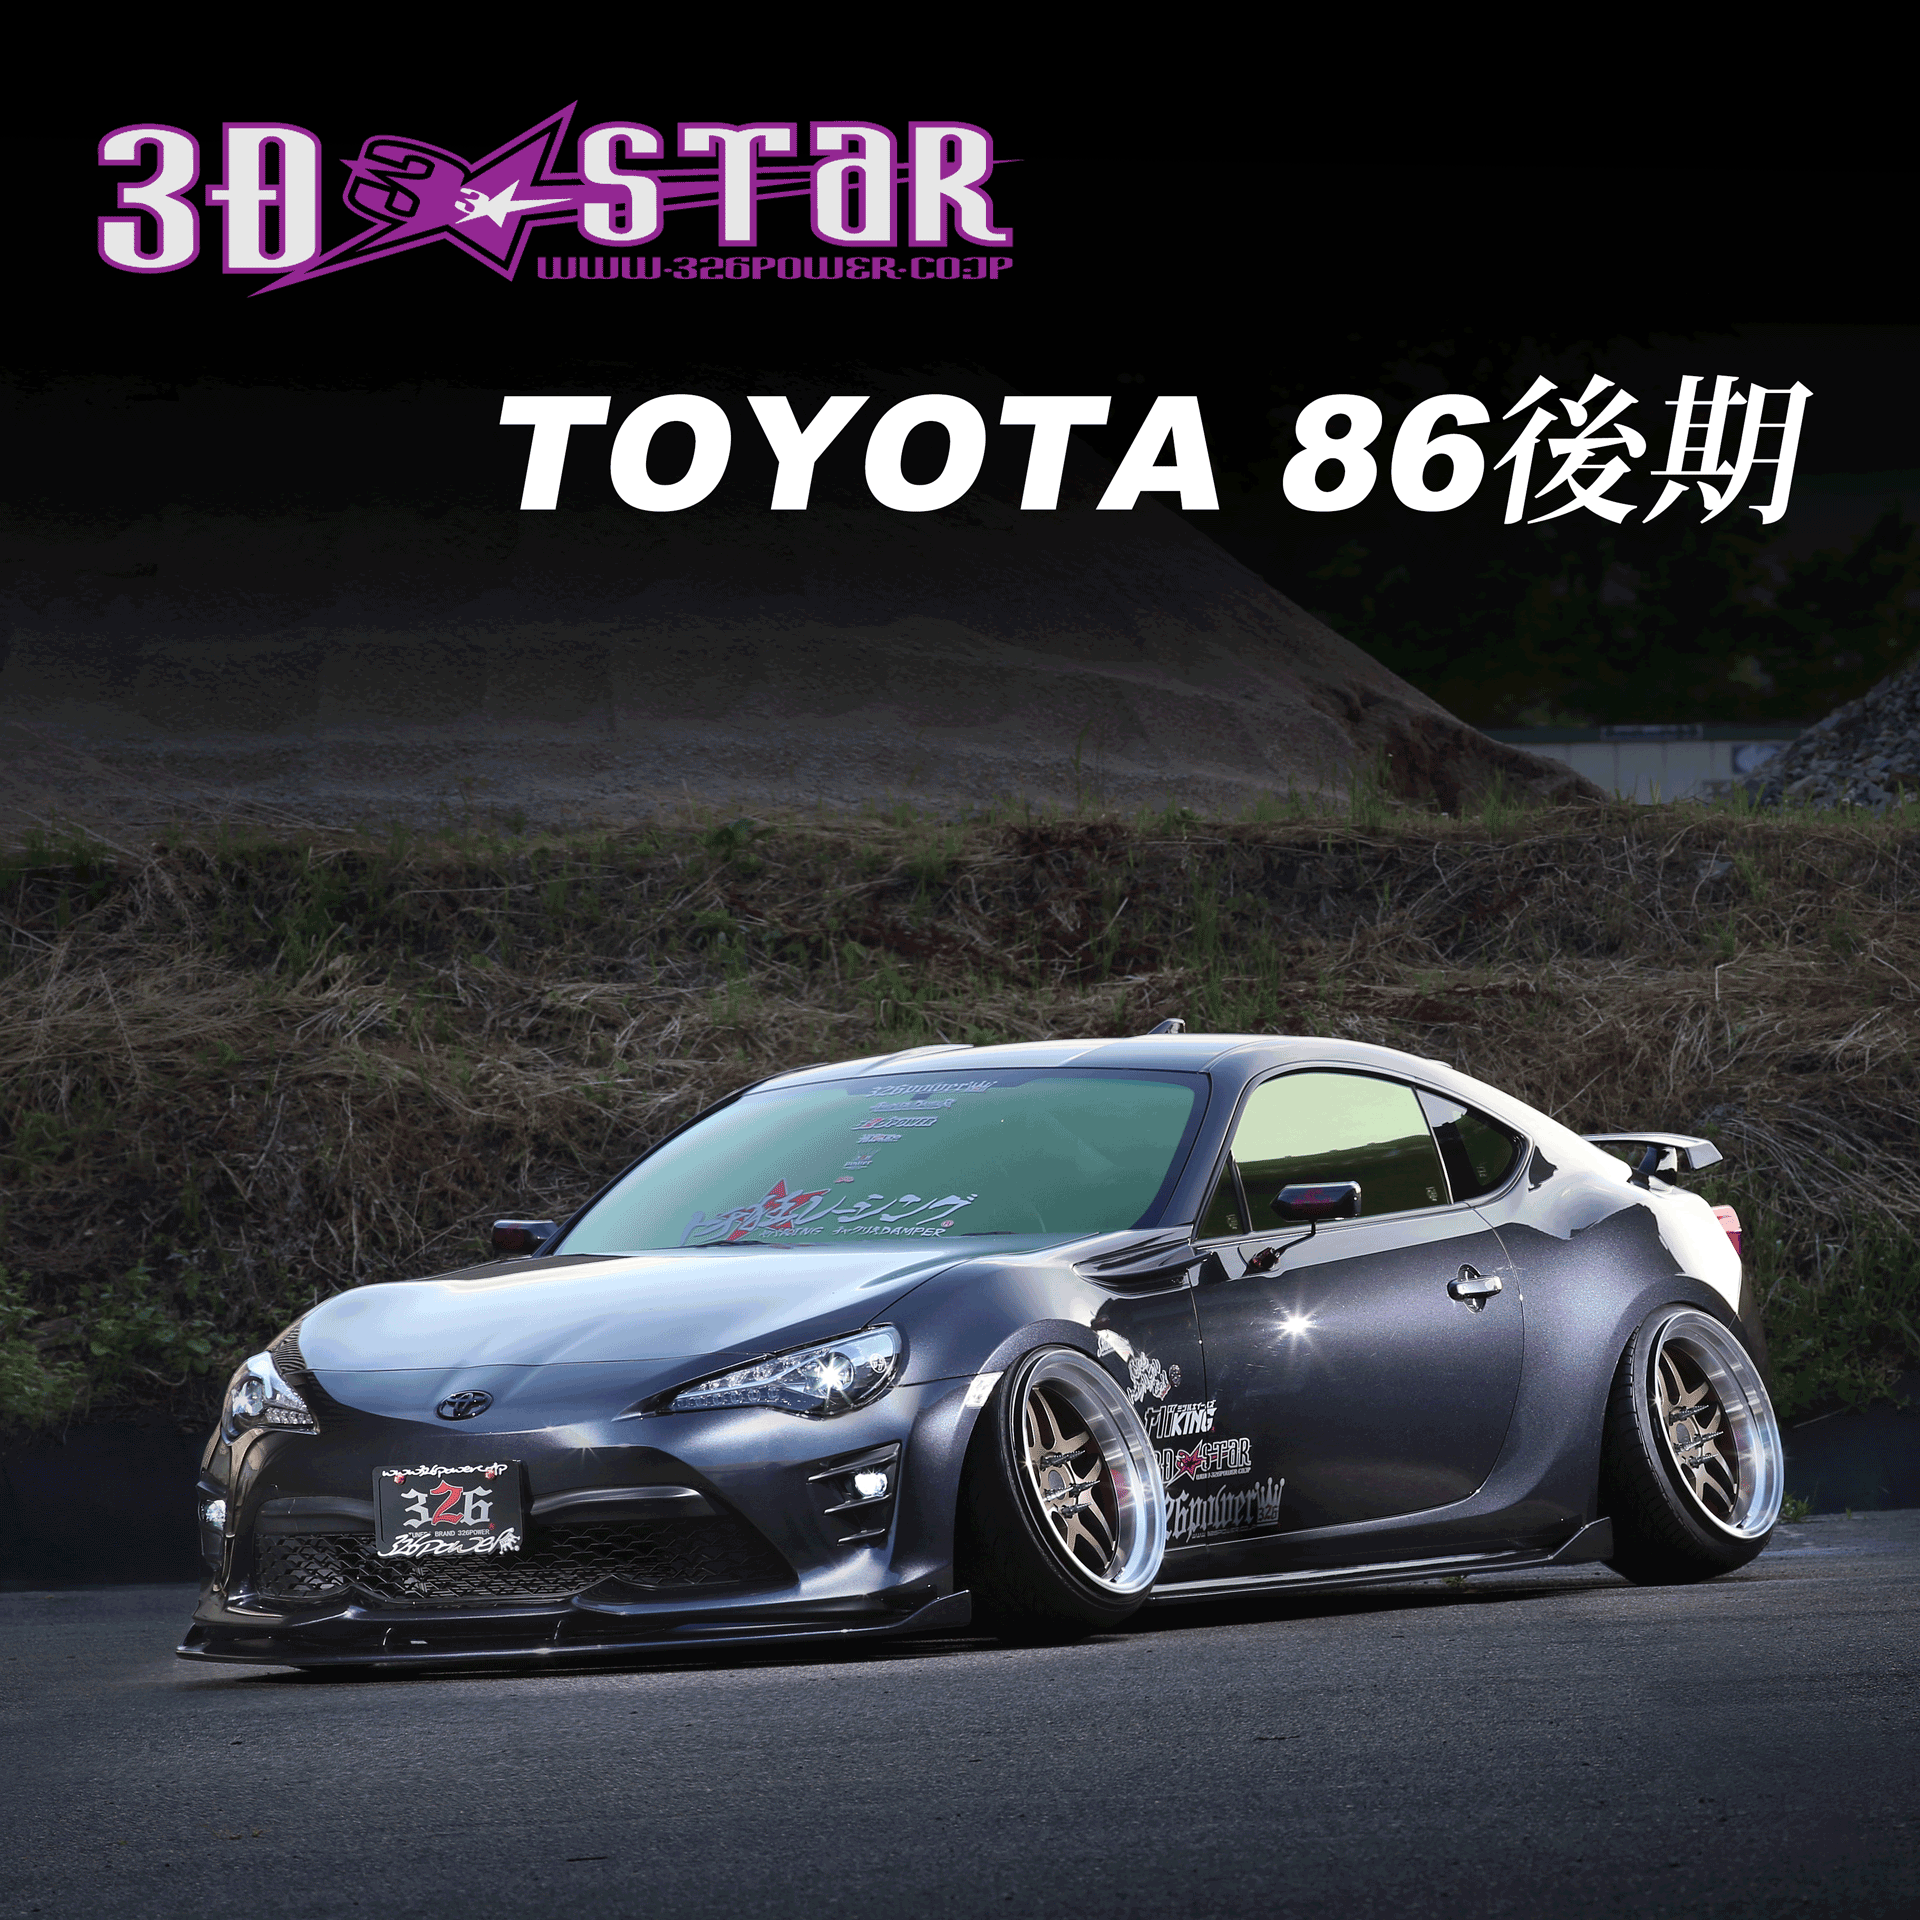 326 Power - 3D ☆ STAR - Toyota 86 Late